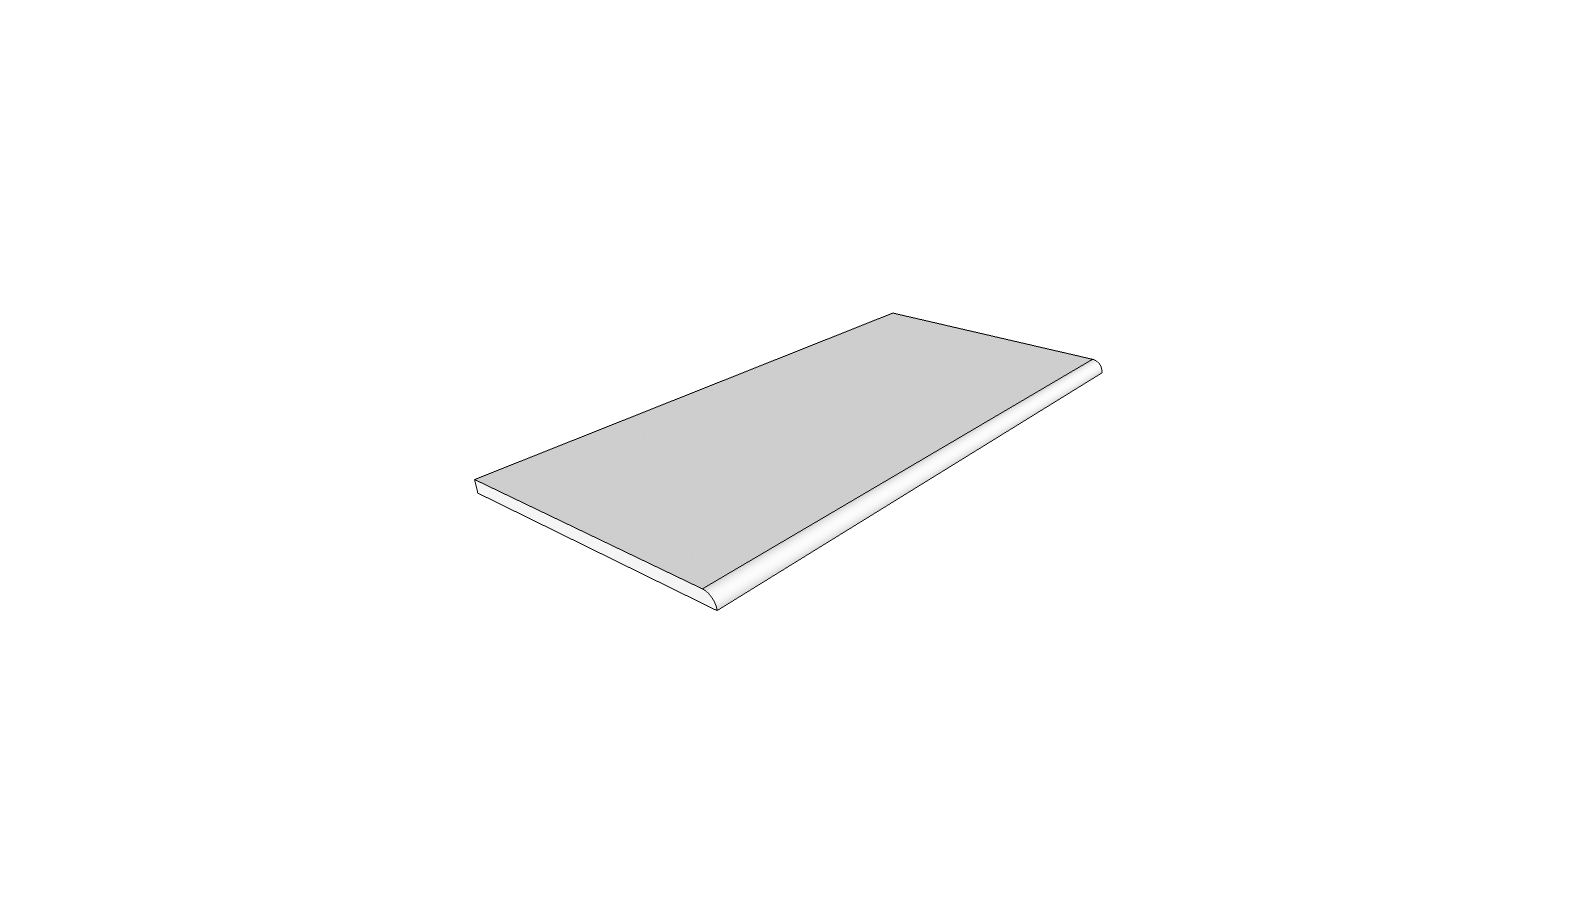 Bullnose surface rounded edge <span style="white-space:nowrap;">24"x36"</span>   <span style="white-space:nowrap;">thk. 20mm</span>